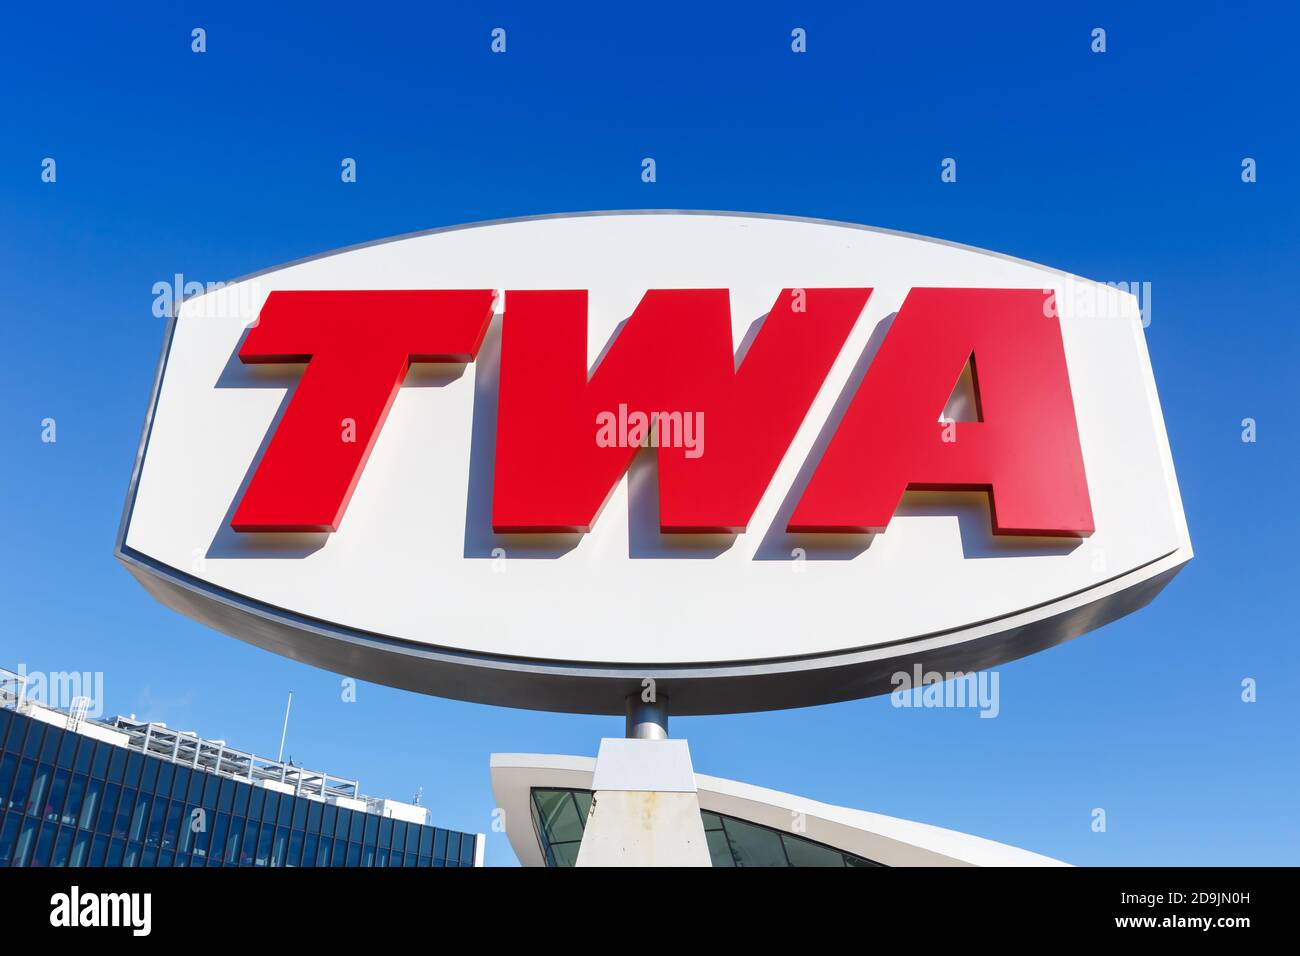 New York City, New York - March 1, 2020: TWA logo Hotel Terminal at New York JFK Airport in the United States. Stock Photo